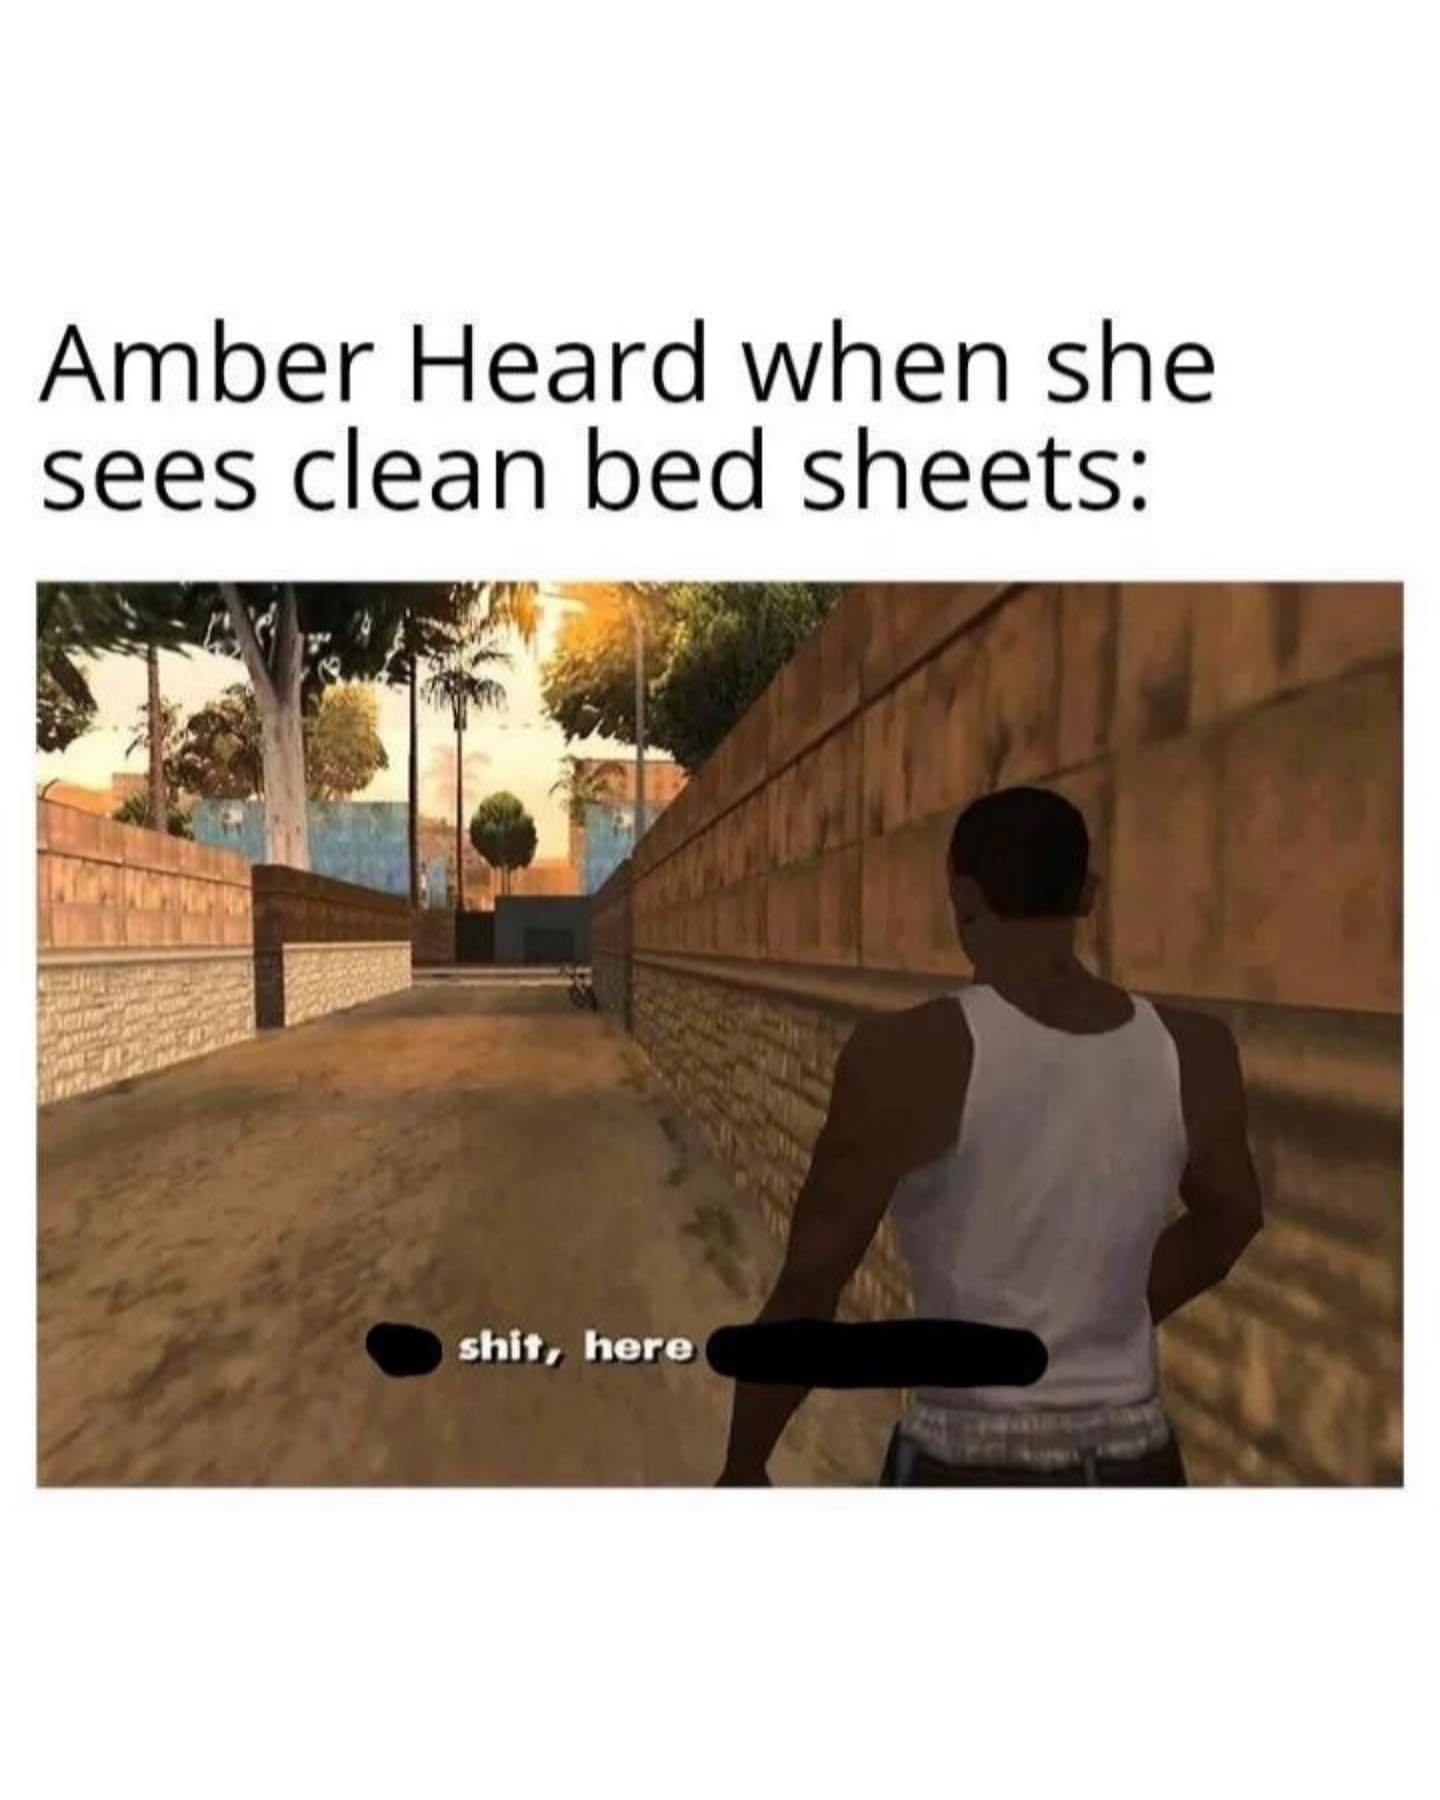 Amber Heard when she sees clean bed sheets: Shit, here.